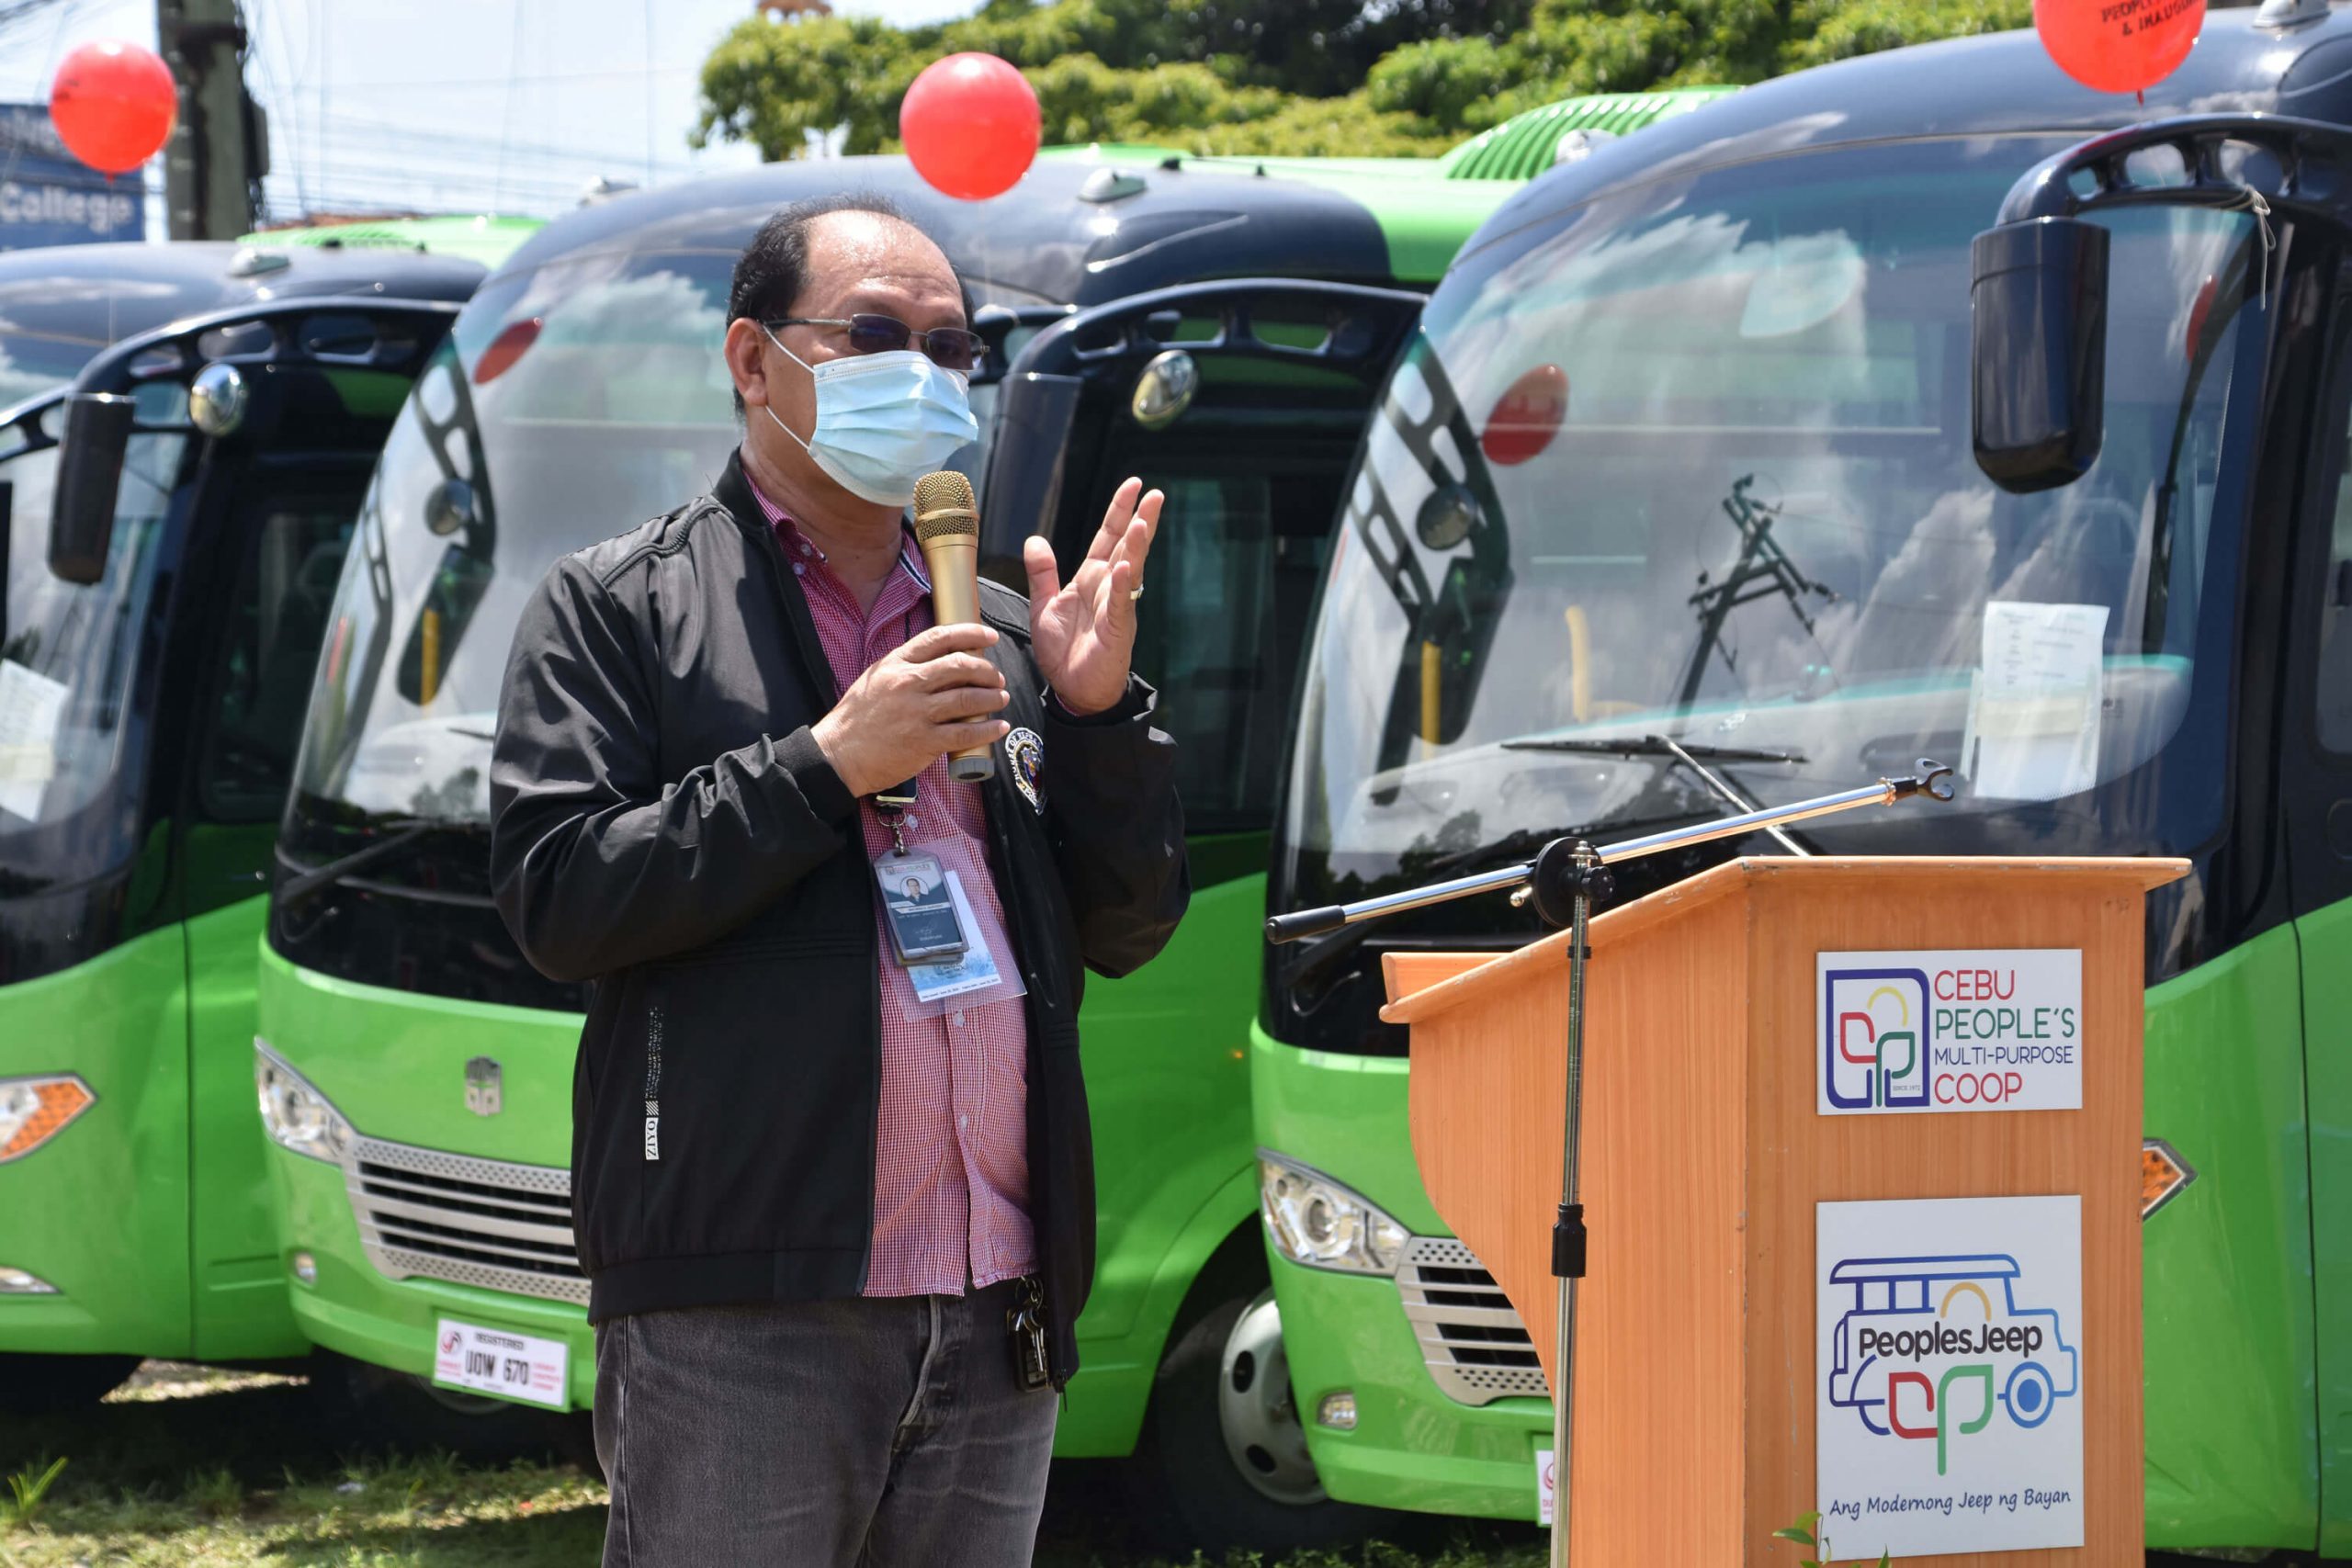 TRANSPORT MODERNIZATION. Cebu People’s Multi-Purpose Cooperative Chief Executive Officer Macario G. Quevedo says the purchase and deployment by CPMPC of modern jeepneys is their answer to government’s call for transport modernization.